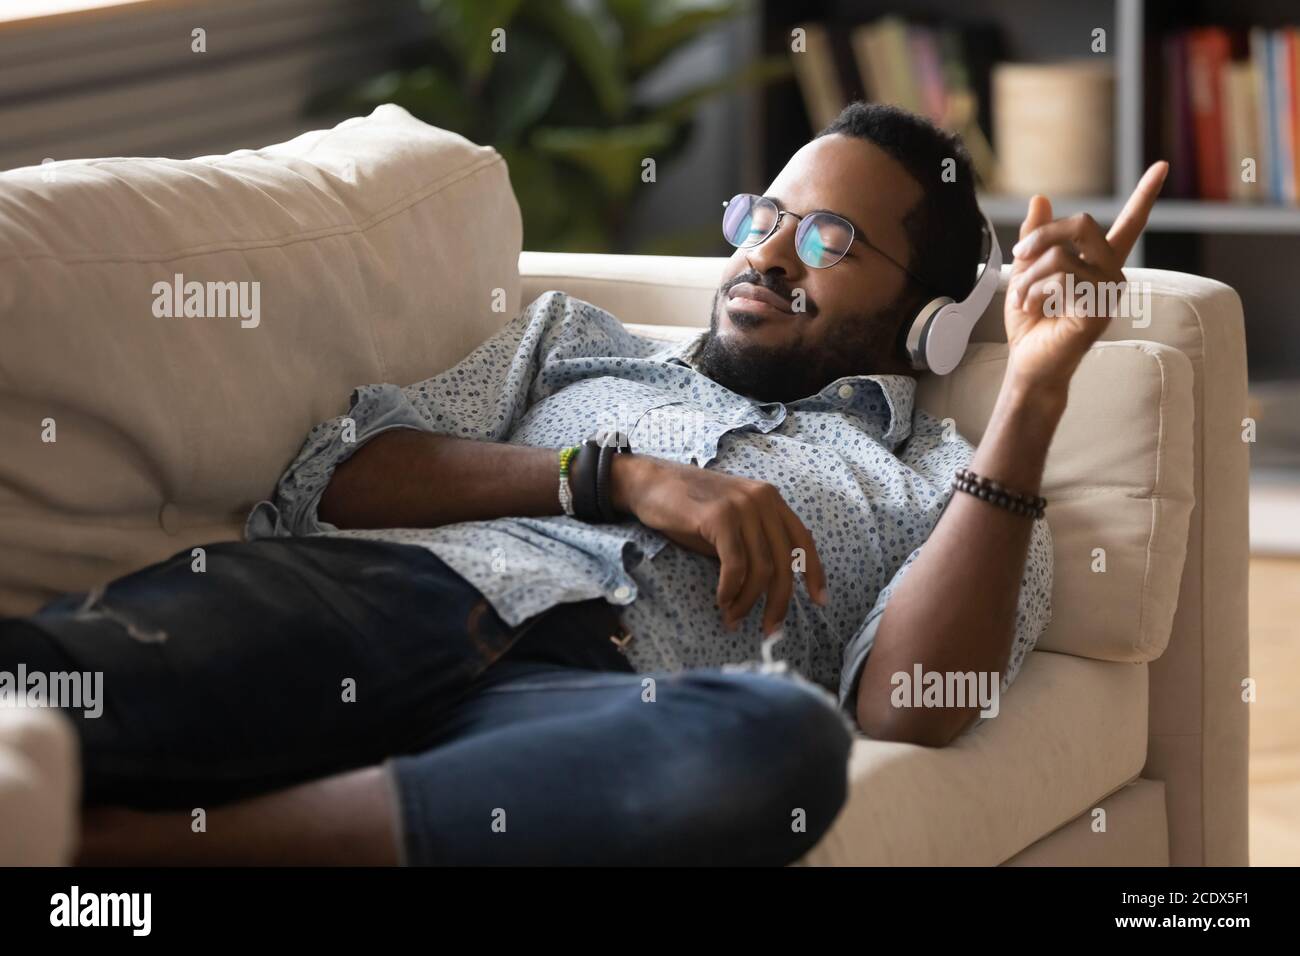 Satisfied positive African American man lying on couch, enjoying music Stock Photo